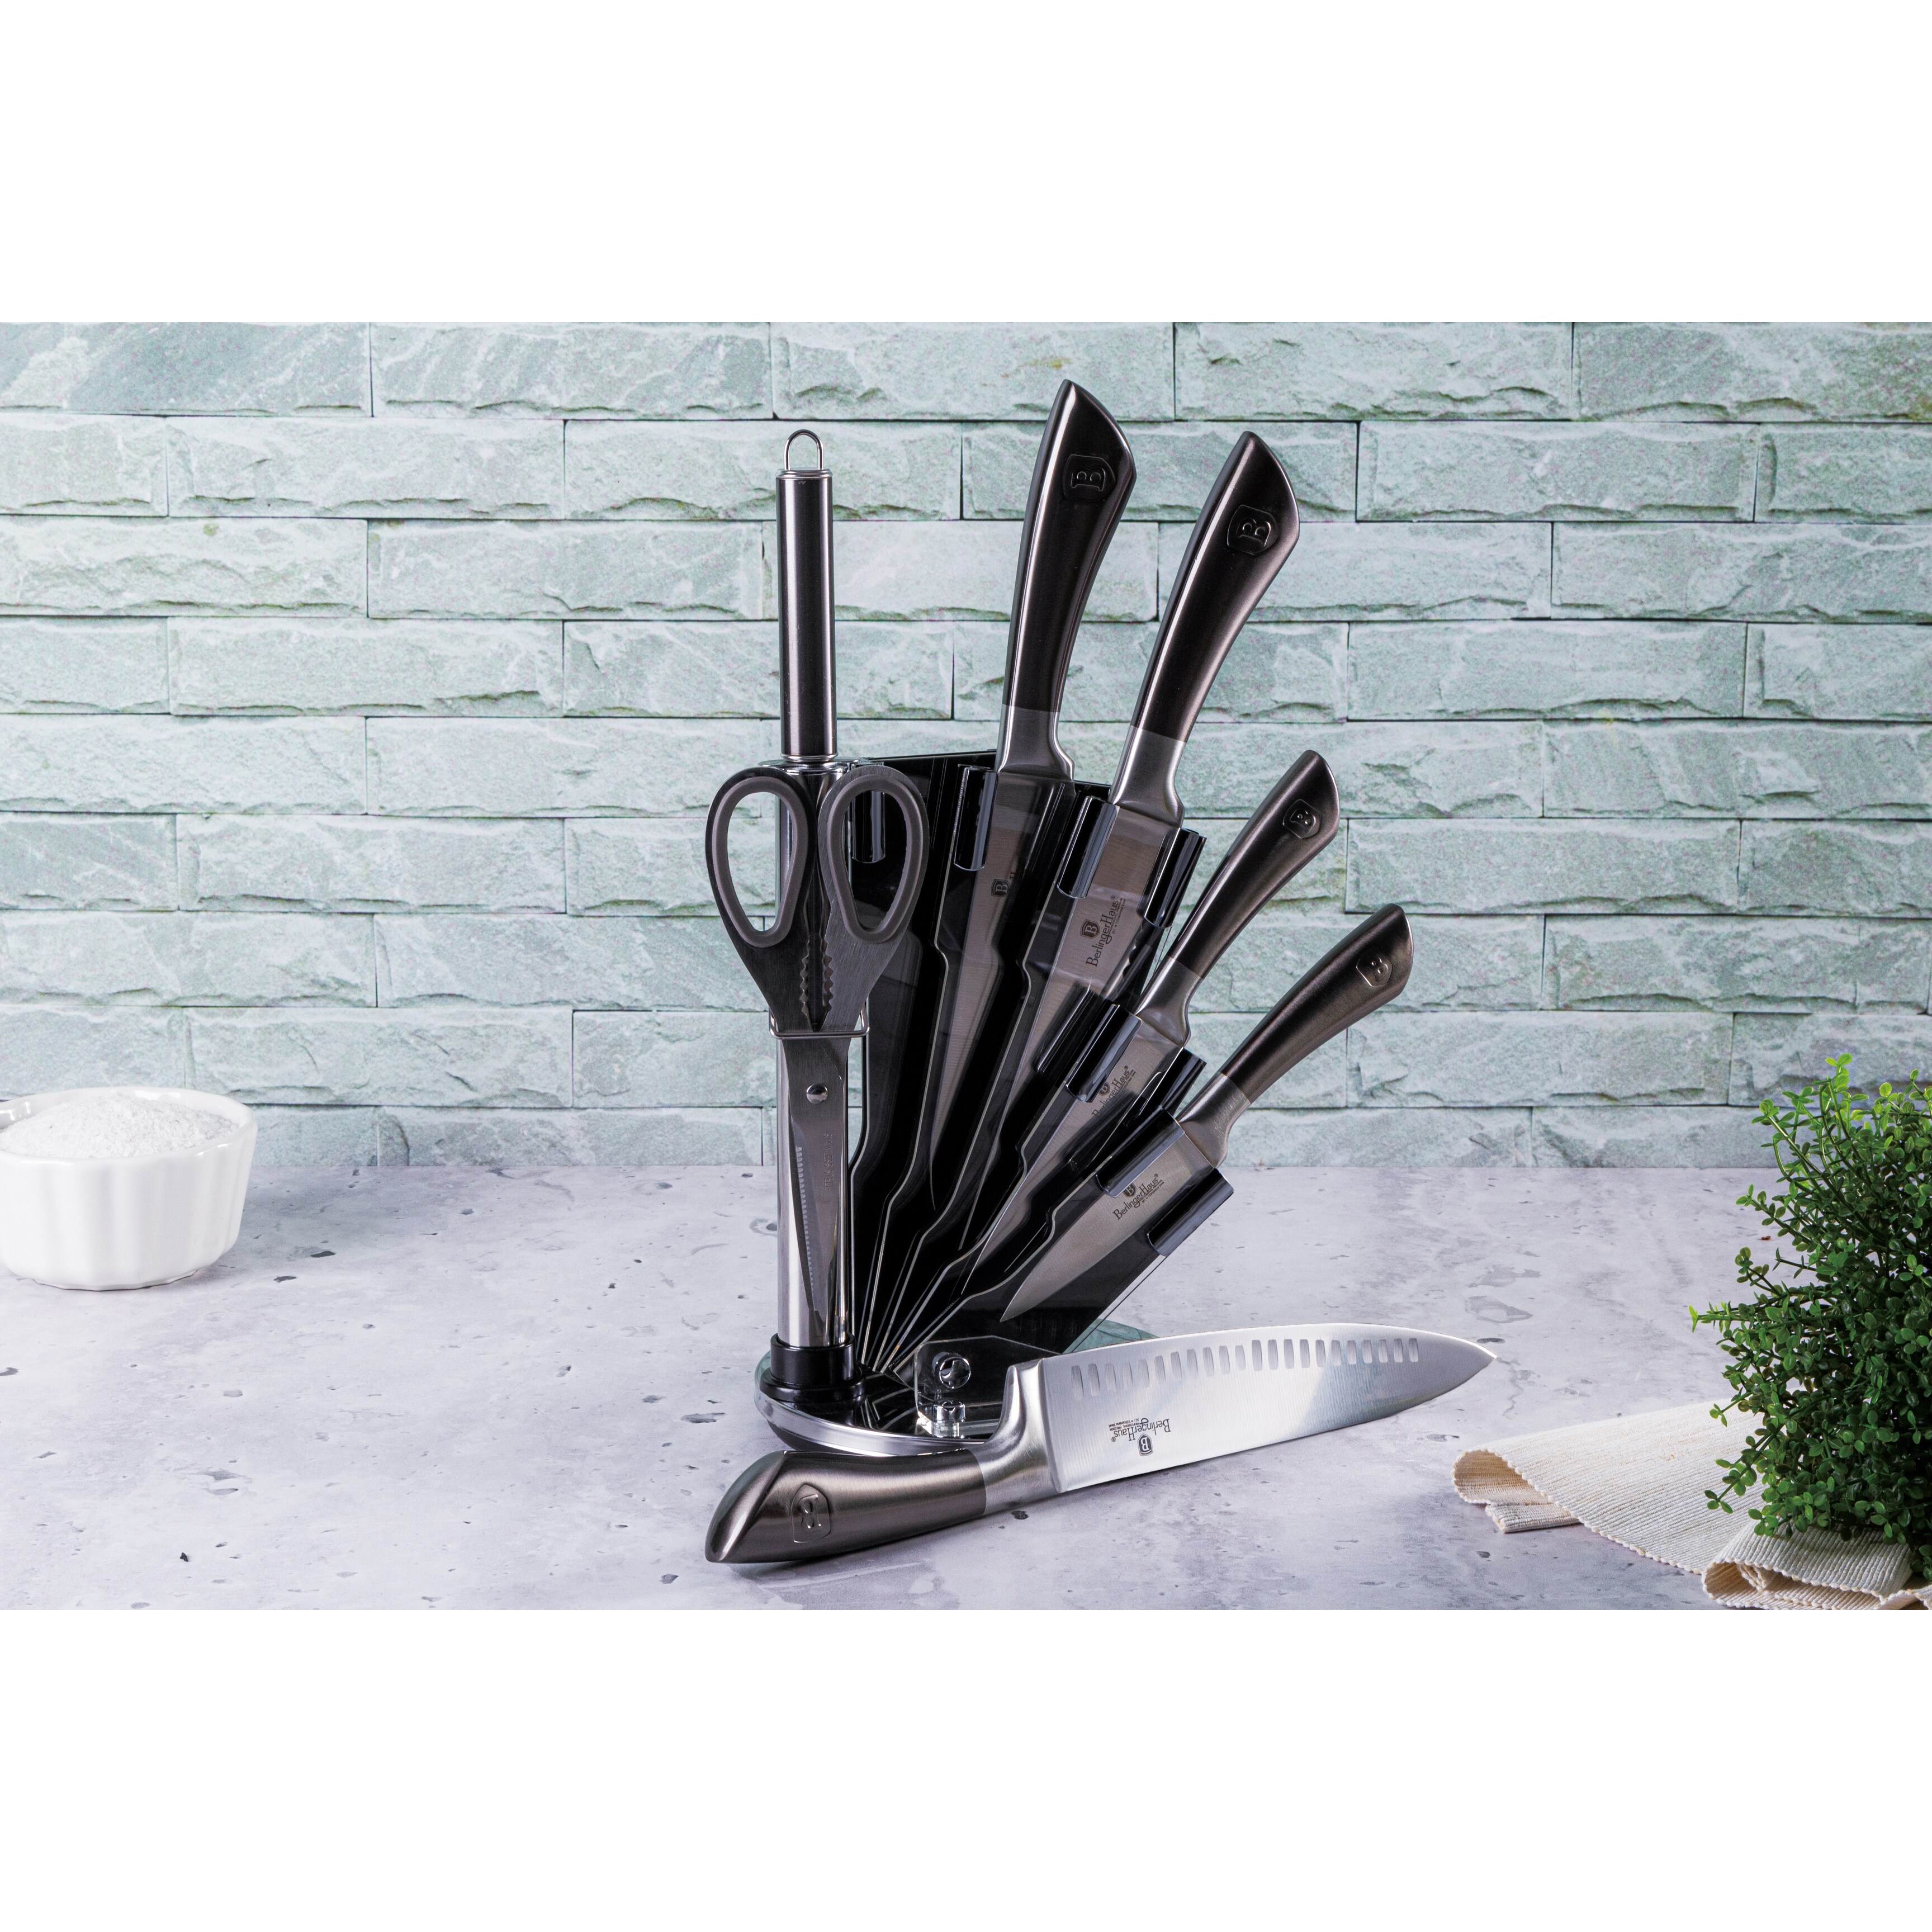 https://ak1.ostkcdn.com/images/products/is/images/direct/0e3a58c3ff17774e648f07141a64b866367d73fa/8-Piece-Knife-Set-w--Acrylic-Stand%2C-Carbon-Collection.jpg